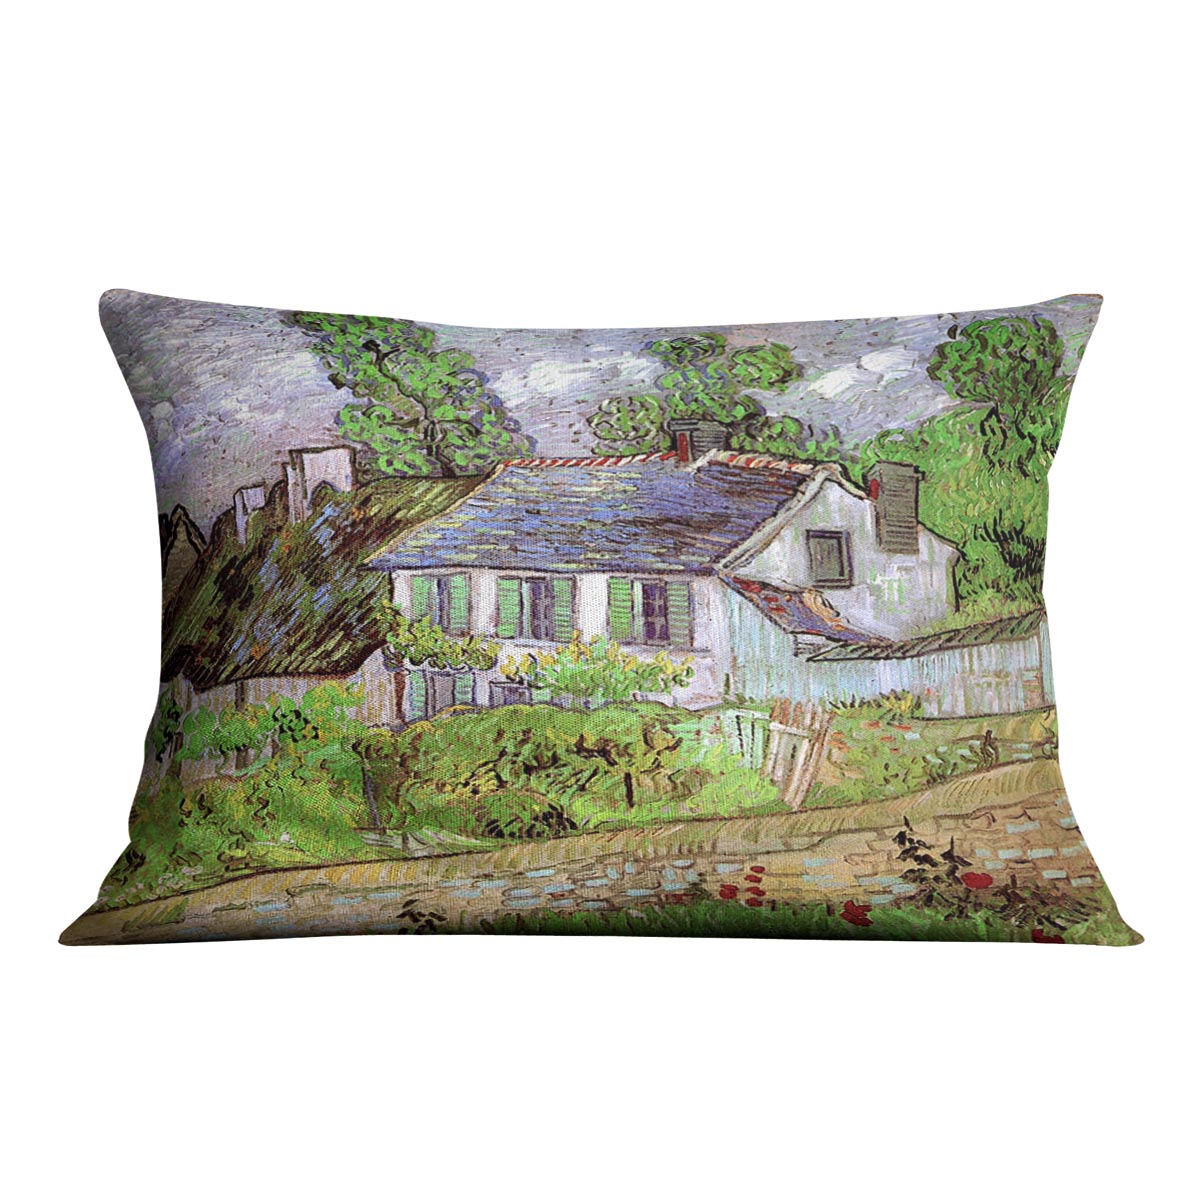 Houses in Auvers 2 by Van Gogh Cushion